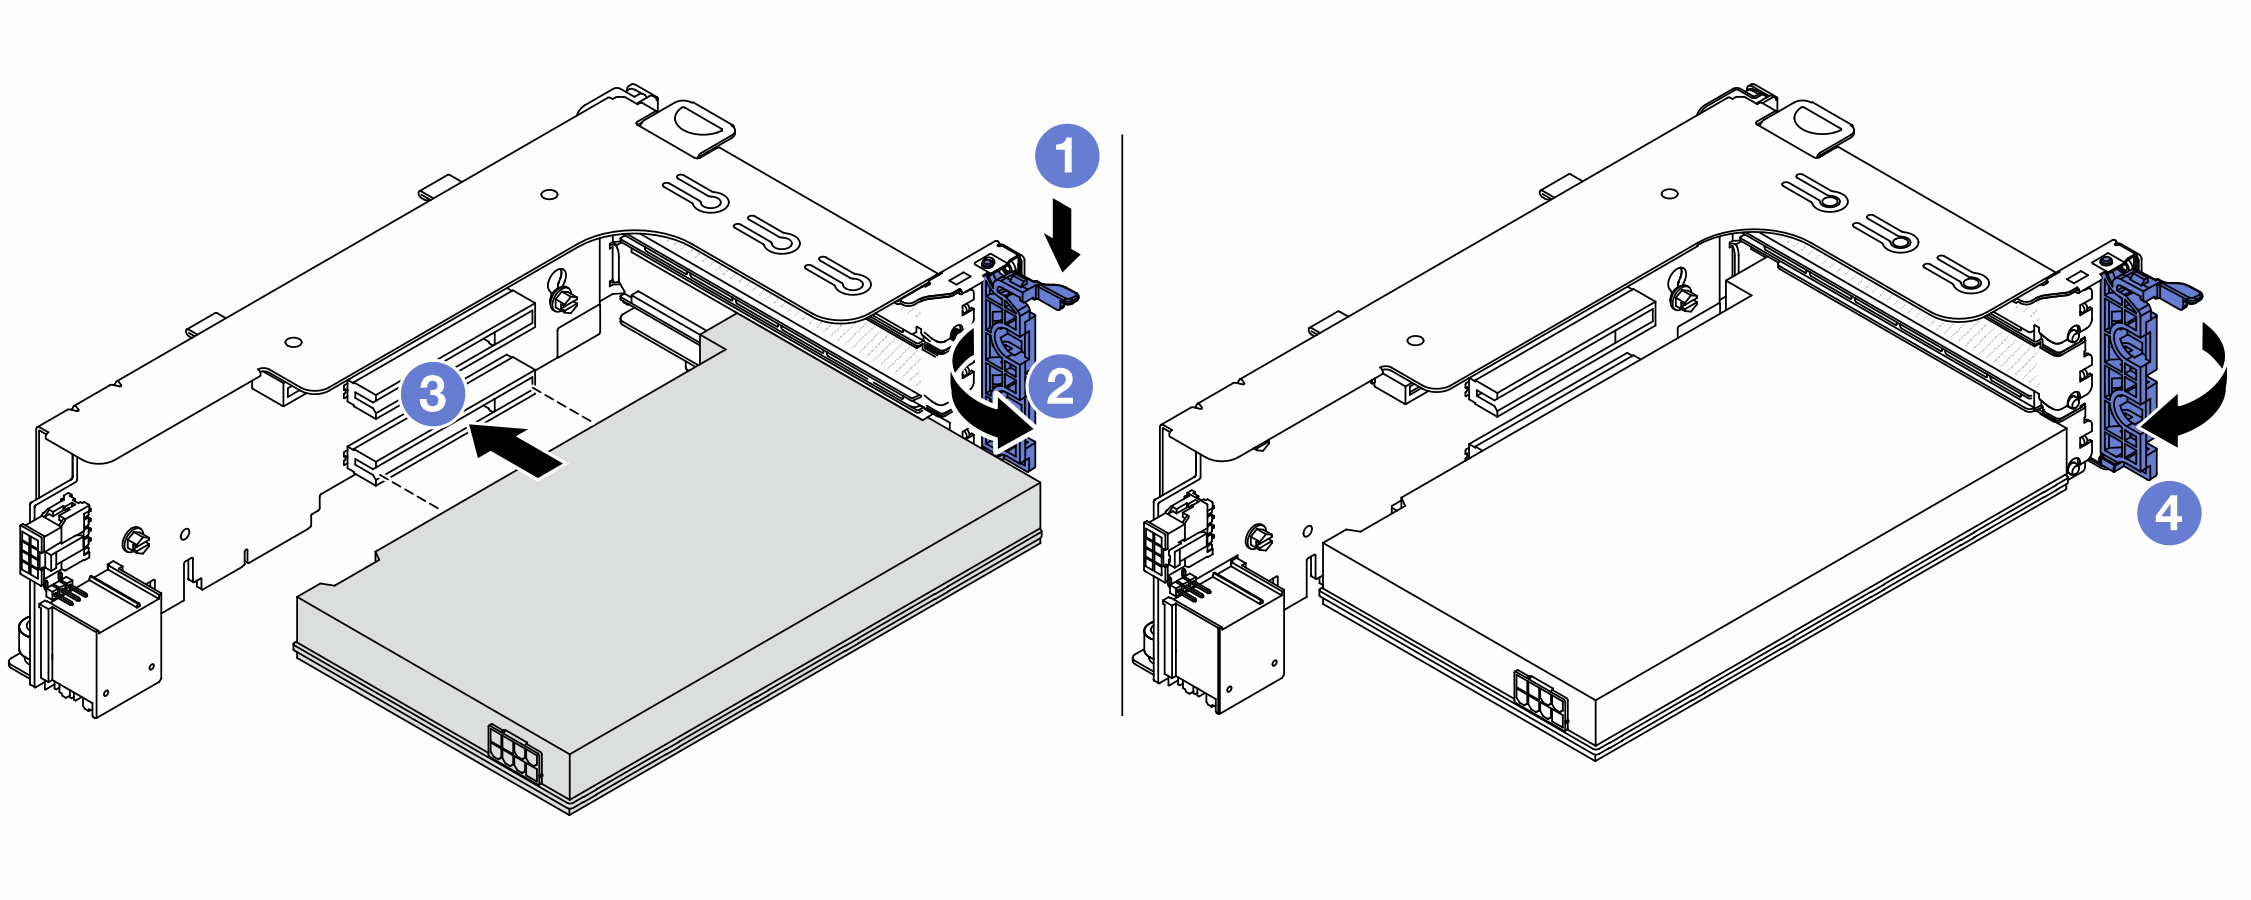 Installing the PCIe adapter to the riser 1 or 2 assembly